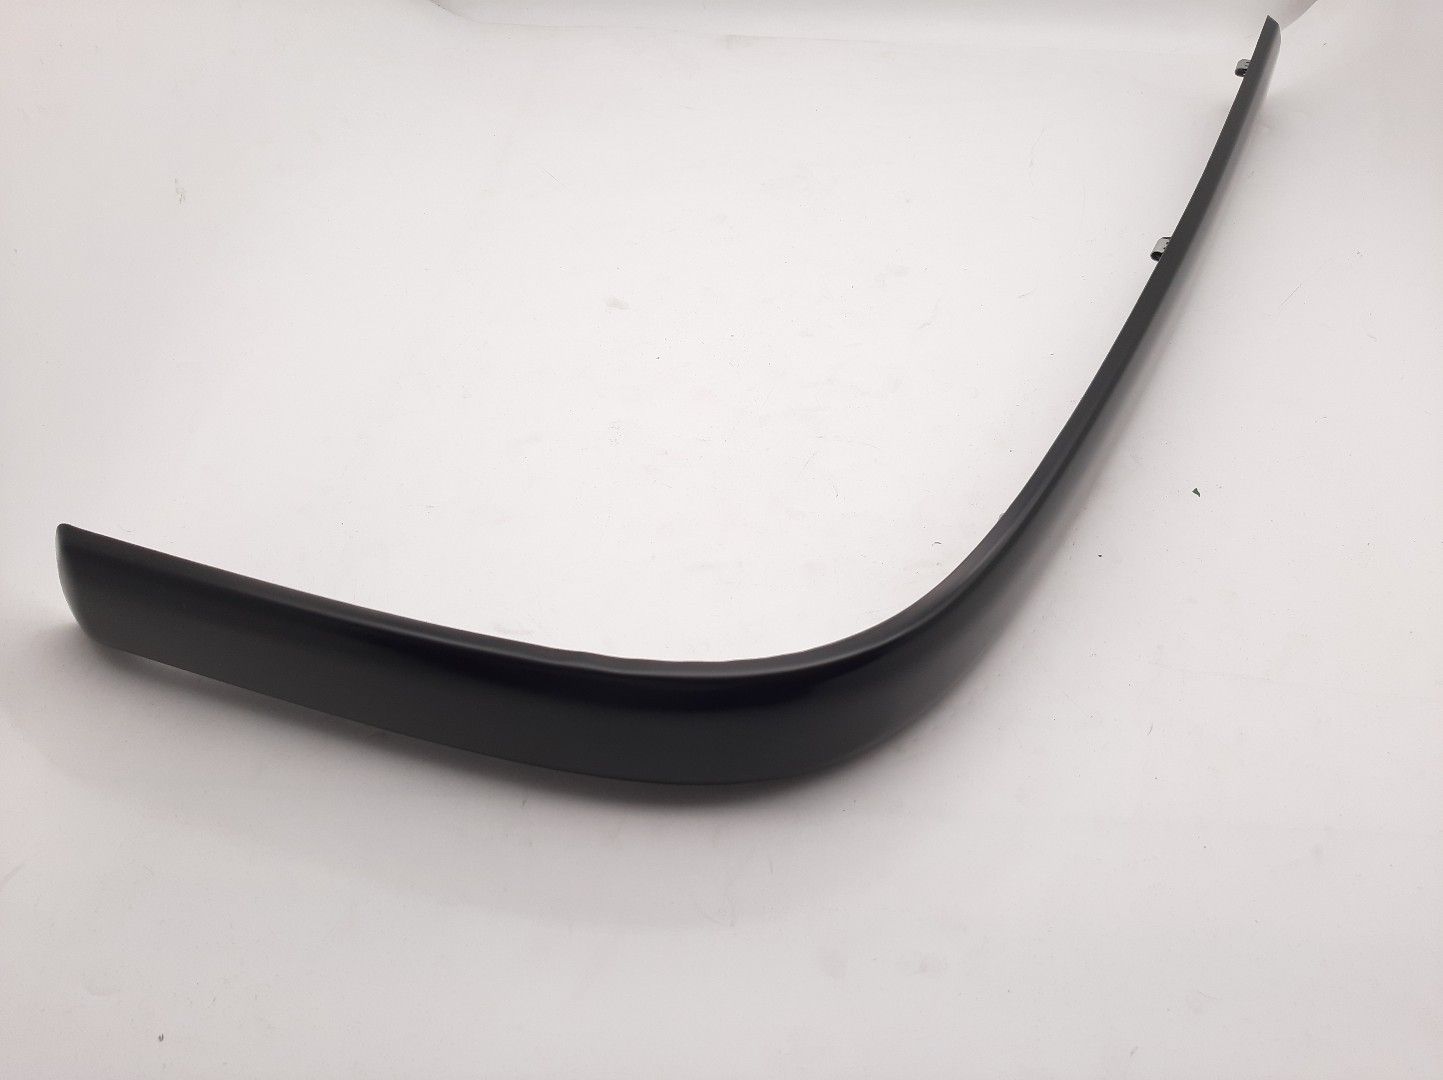 Finisher-rear bumper - Black, RH 200 400 Genuine MG Rover DQR10064PMD DQR10064PM